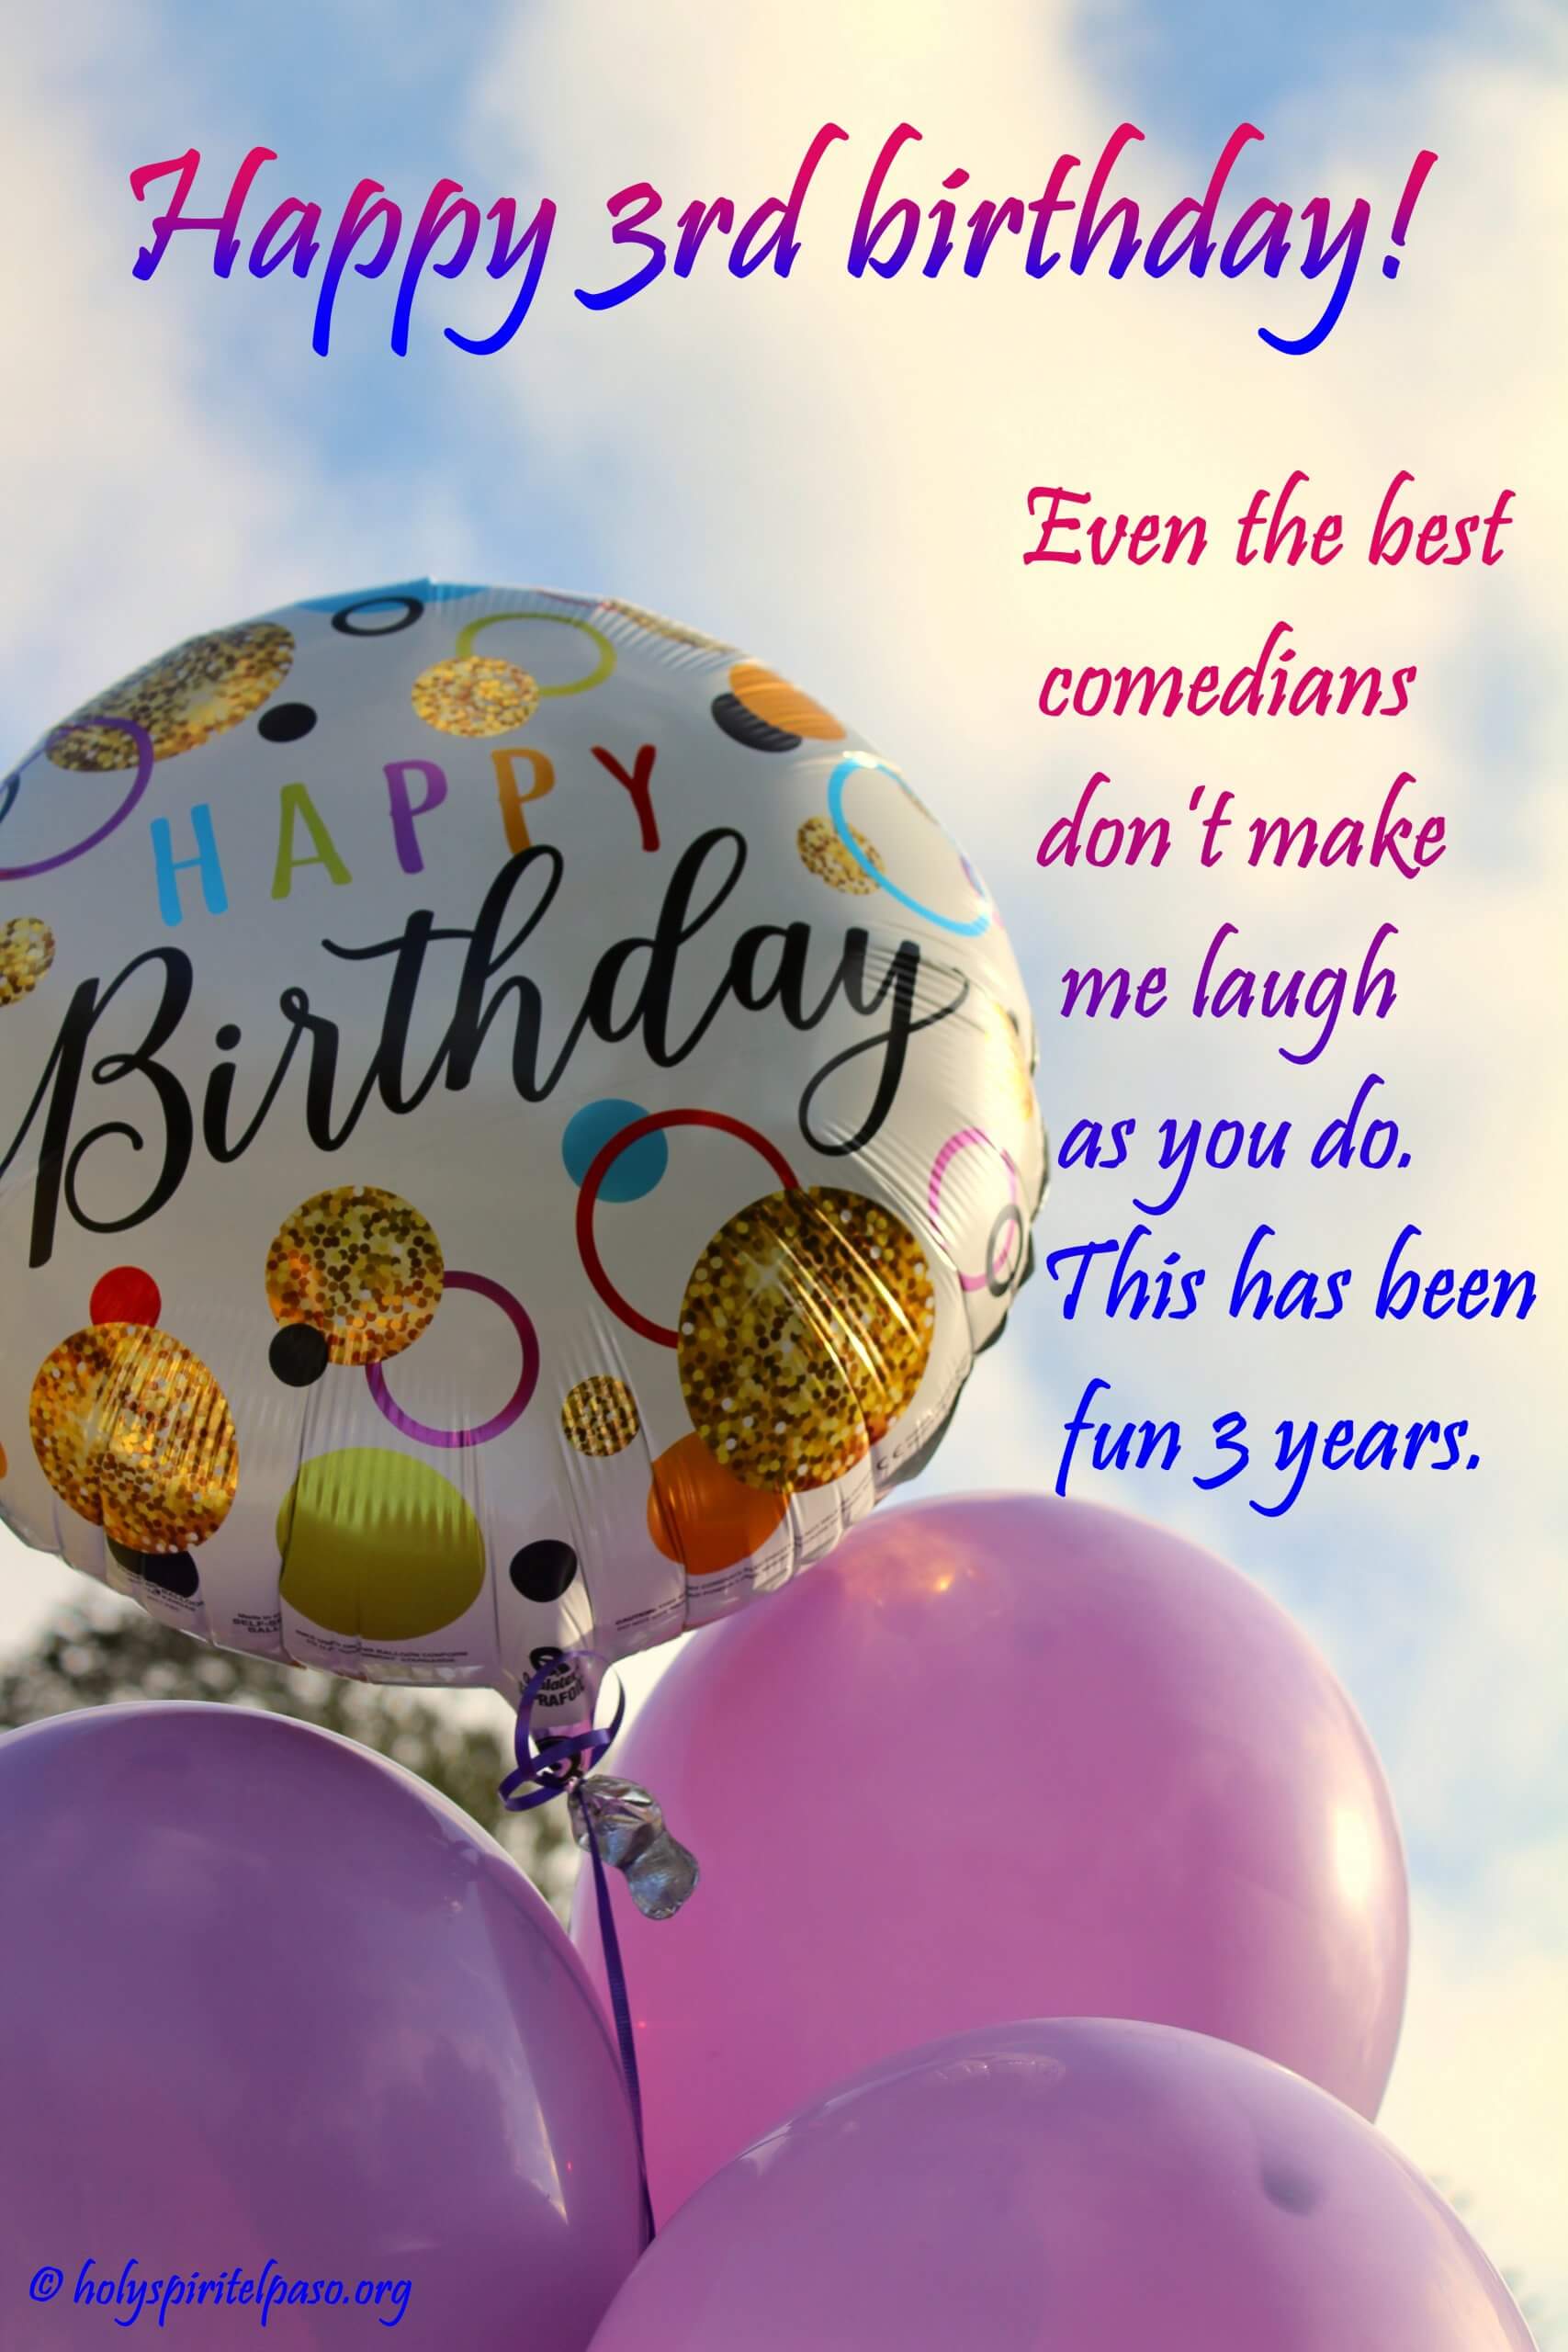 3rd-birthday-wishes-happy-3rd-birthday-quotes-messages